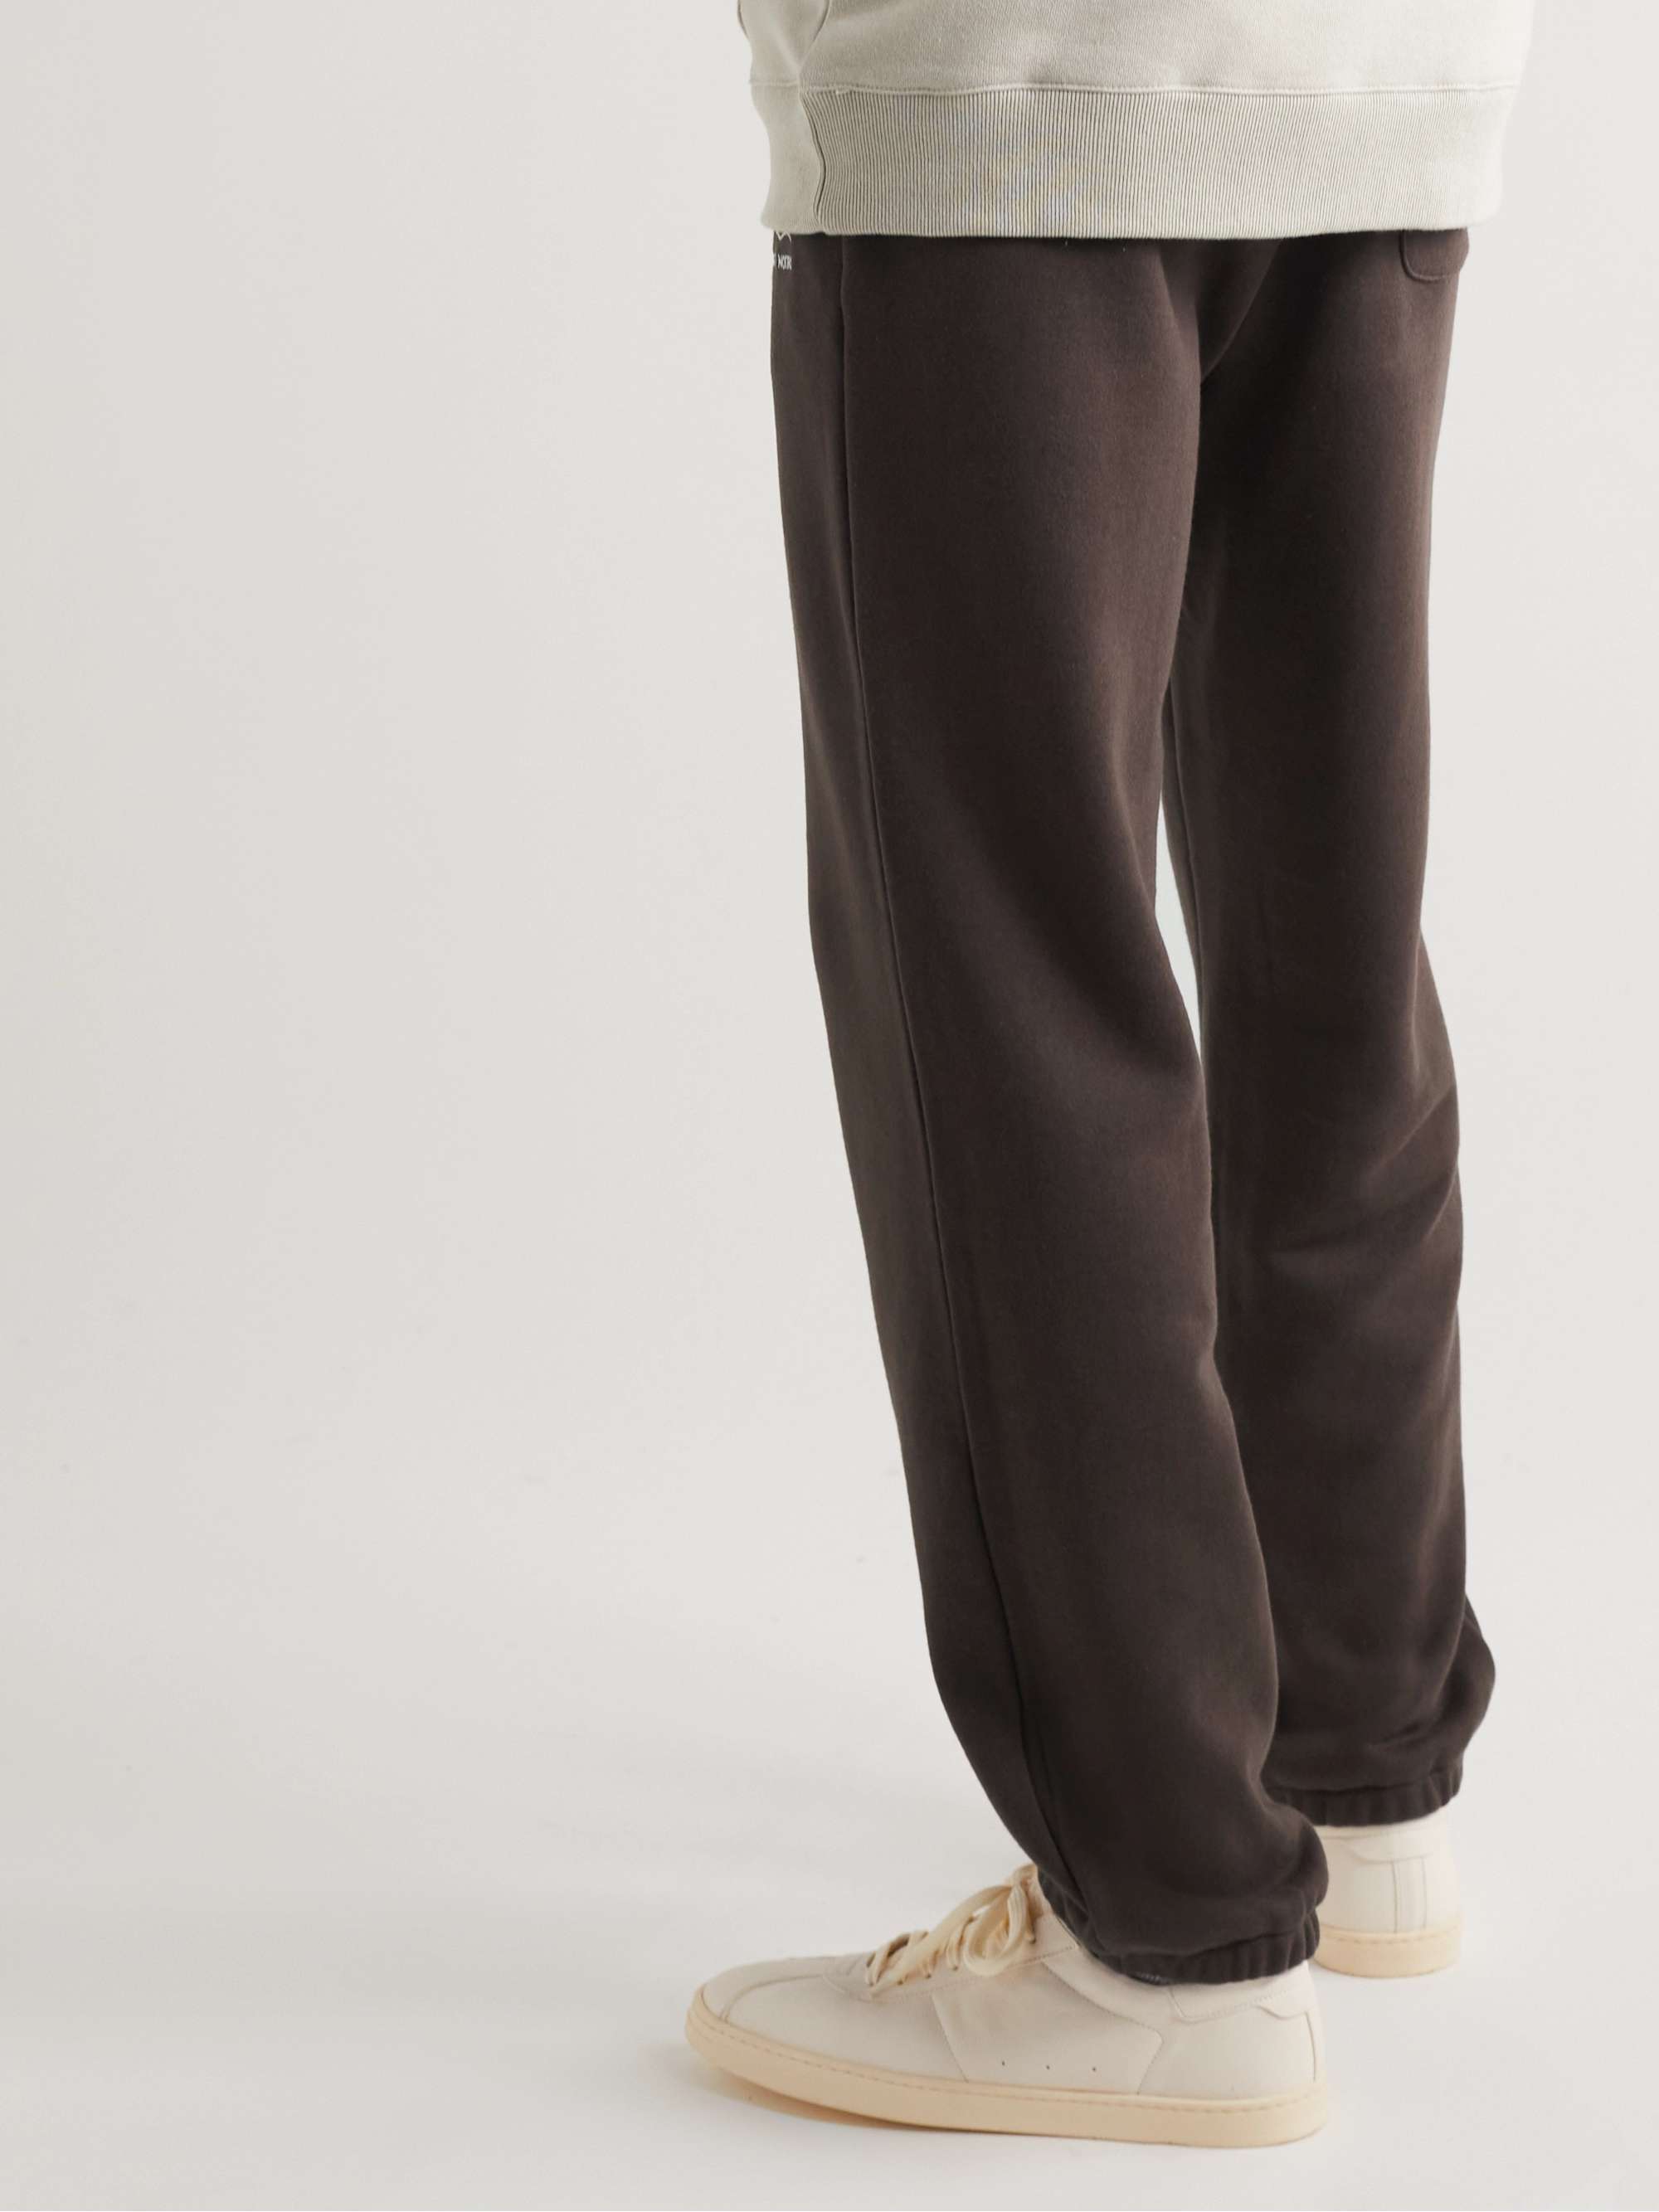 DE BONNE FACTURE Tapered Logo-Embroidered Cotton-Jersey Sweatpants